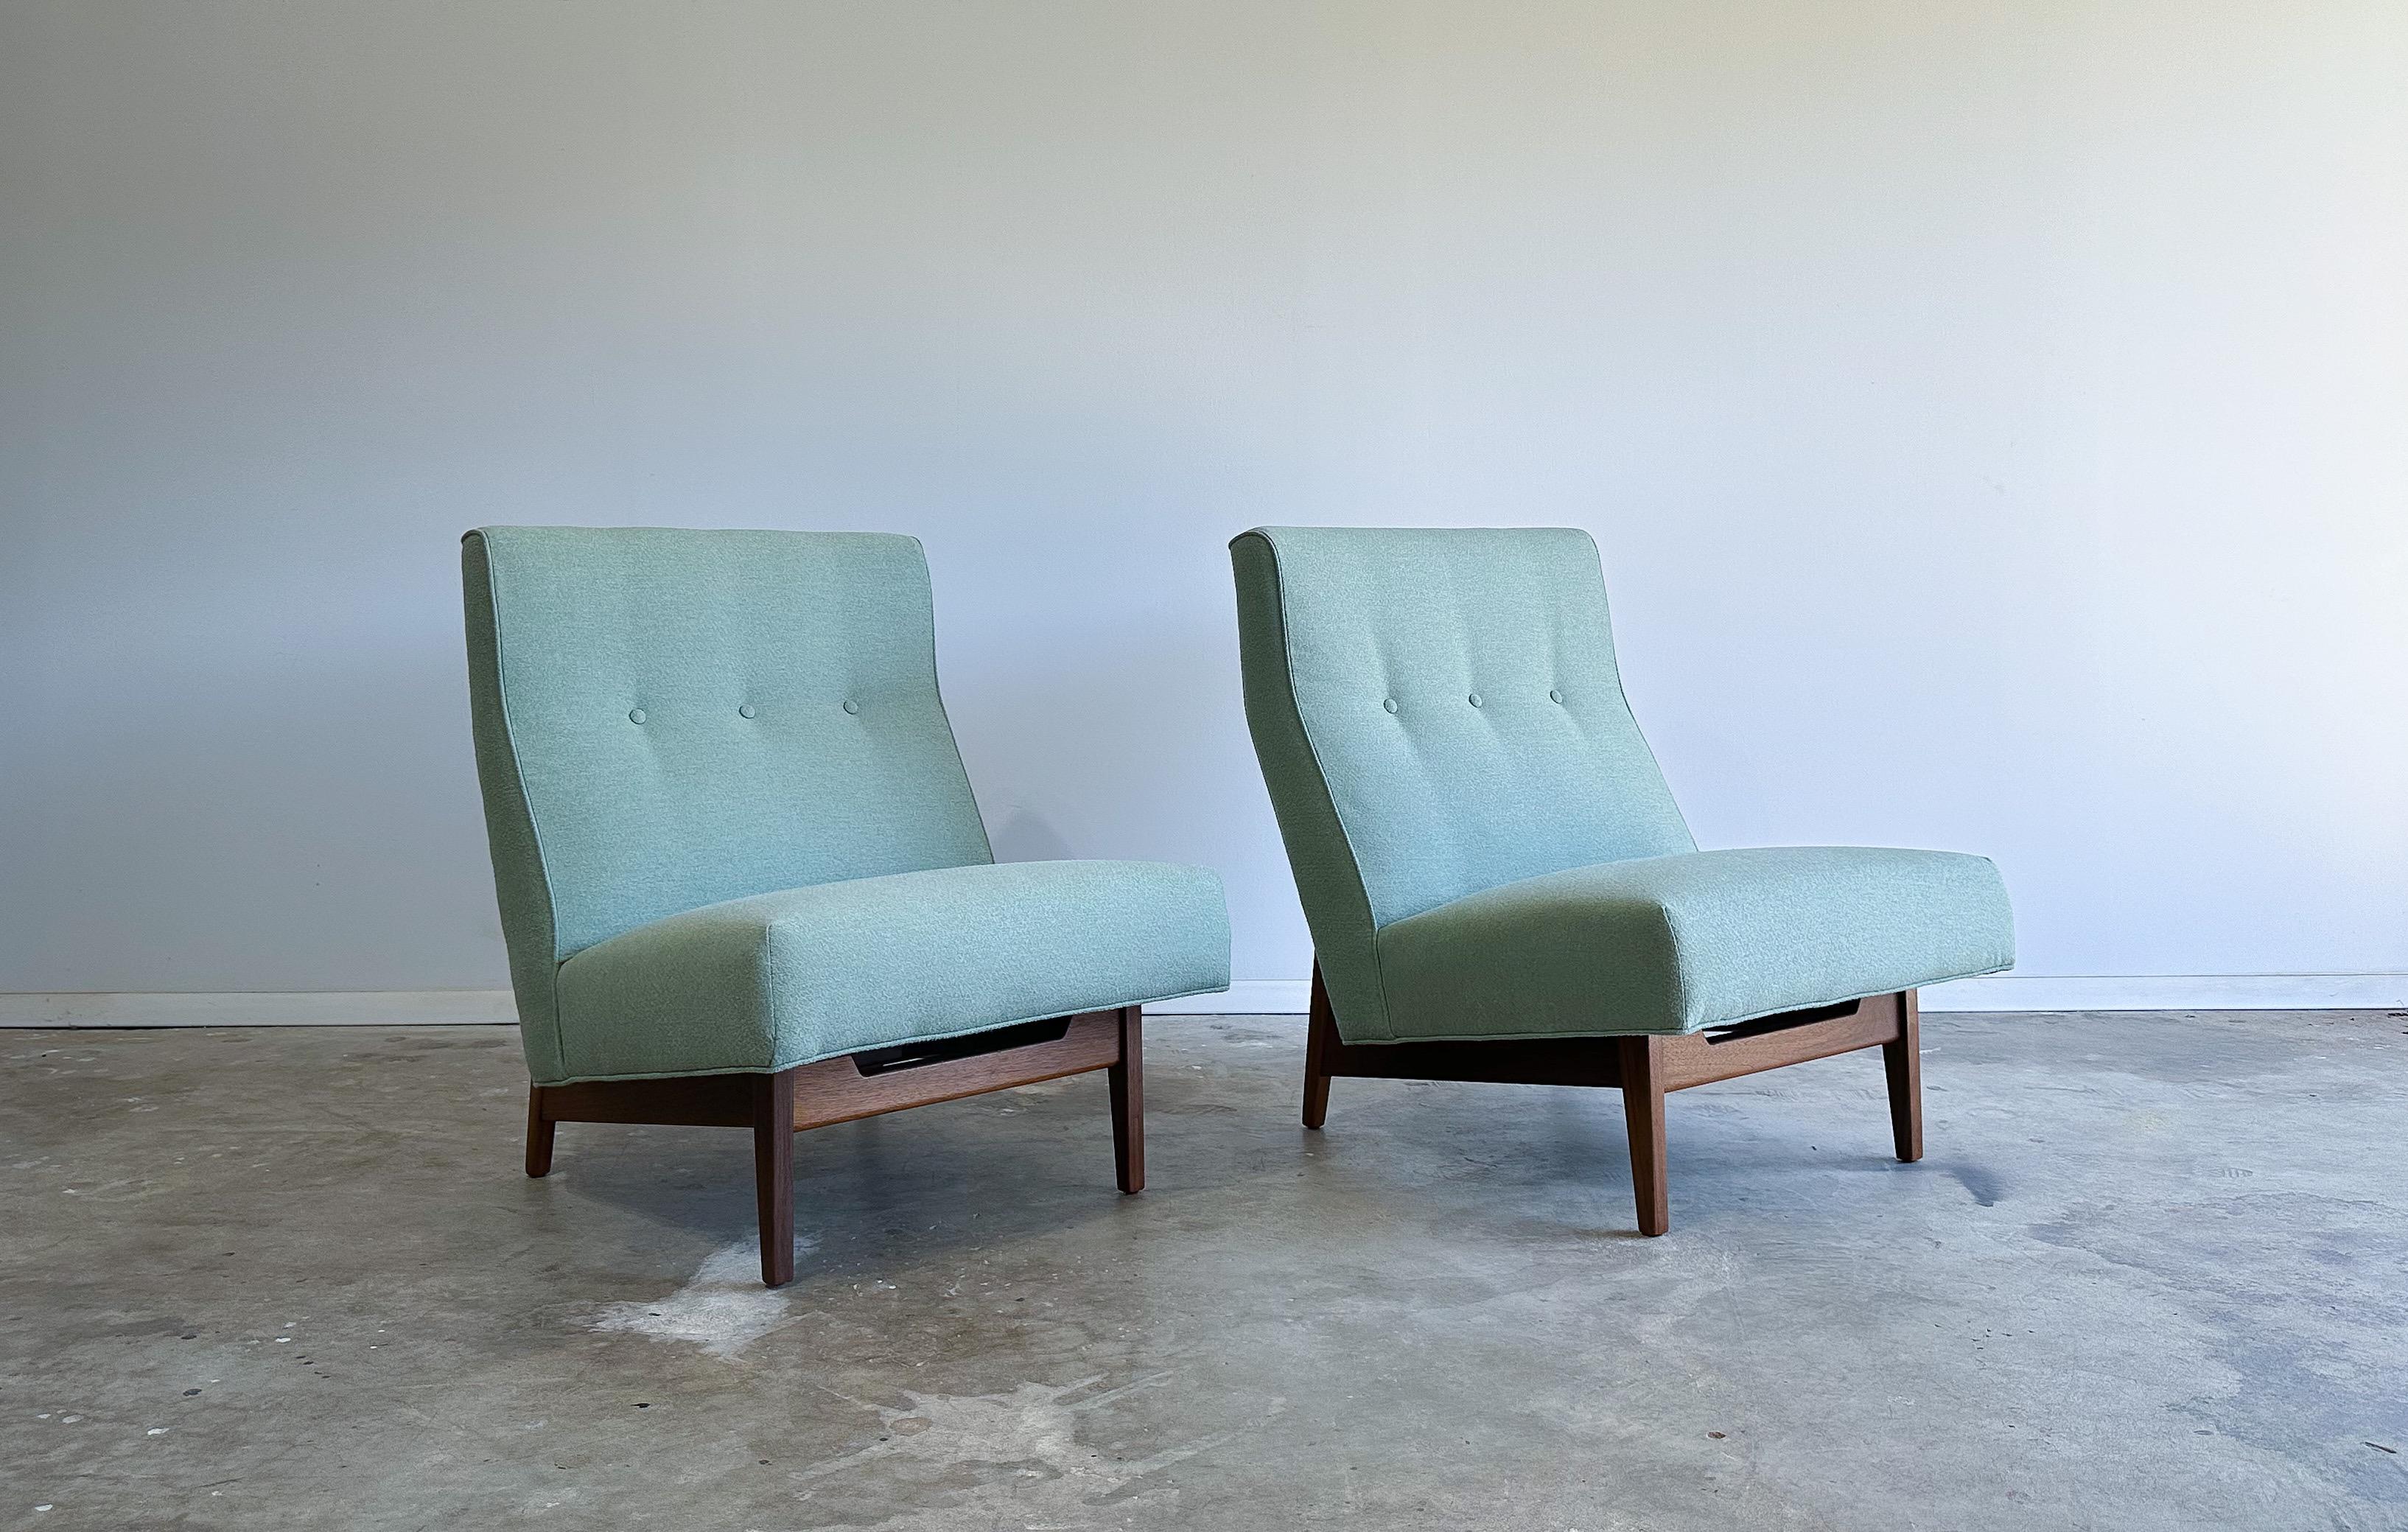 Offered is a wonderful pair of slipper chairs designed by Jens Risom. 

Featuring sleek, solid walnut frames that appear to cradle the newly upholstered seats. We would call the fabric color sage, or pistachio. The warm walnut frames really